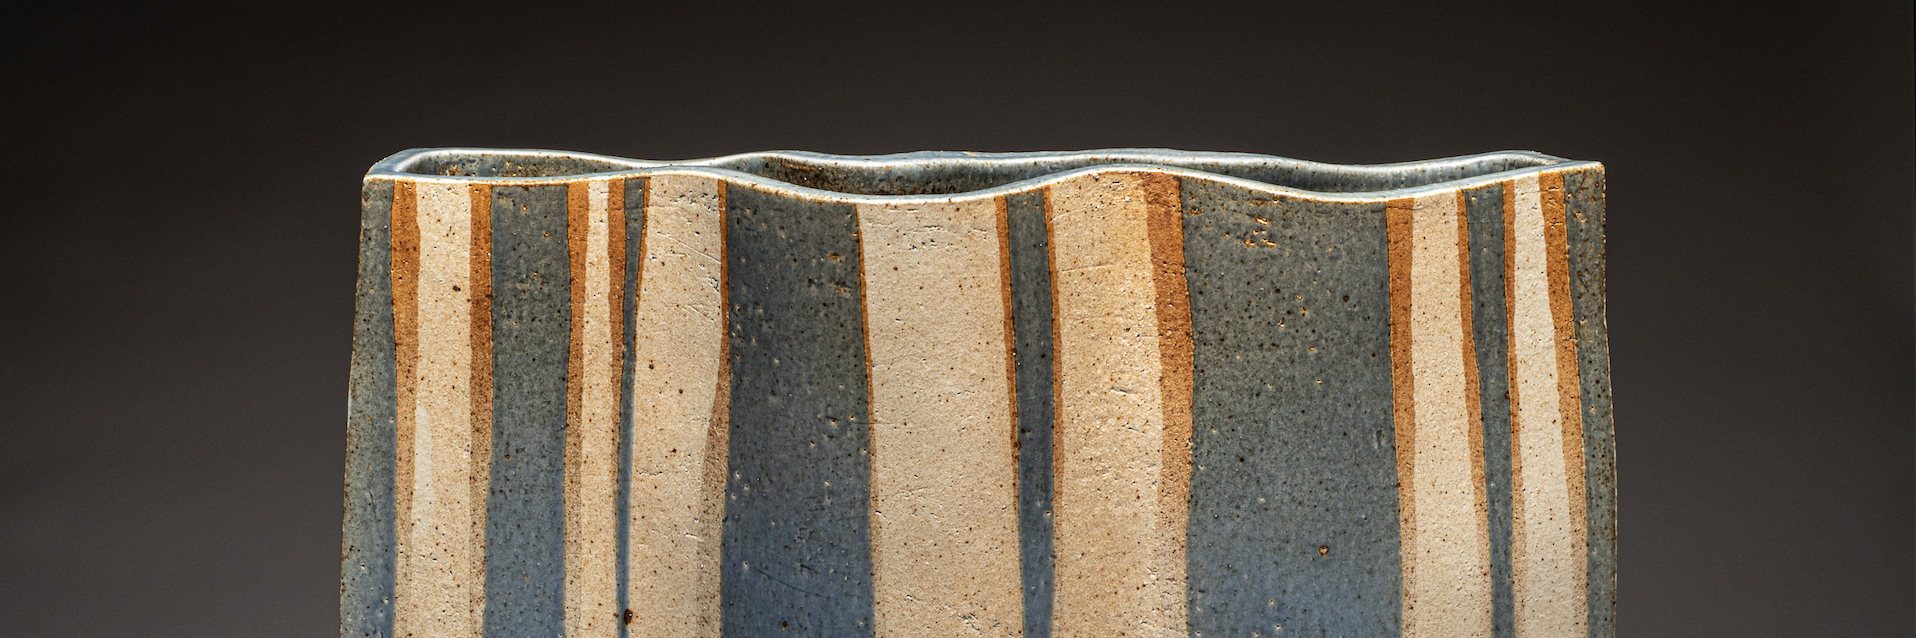 Bente Hansen, Large Slab-Built Vase, n.d., 16-1/4 x 20-7/8 x 7-7/8 inches. Given in Memory of Barbara Robison Davis by her friends, 81.26